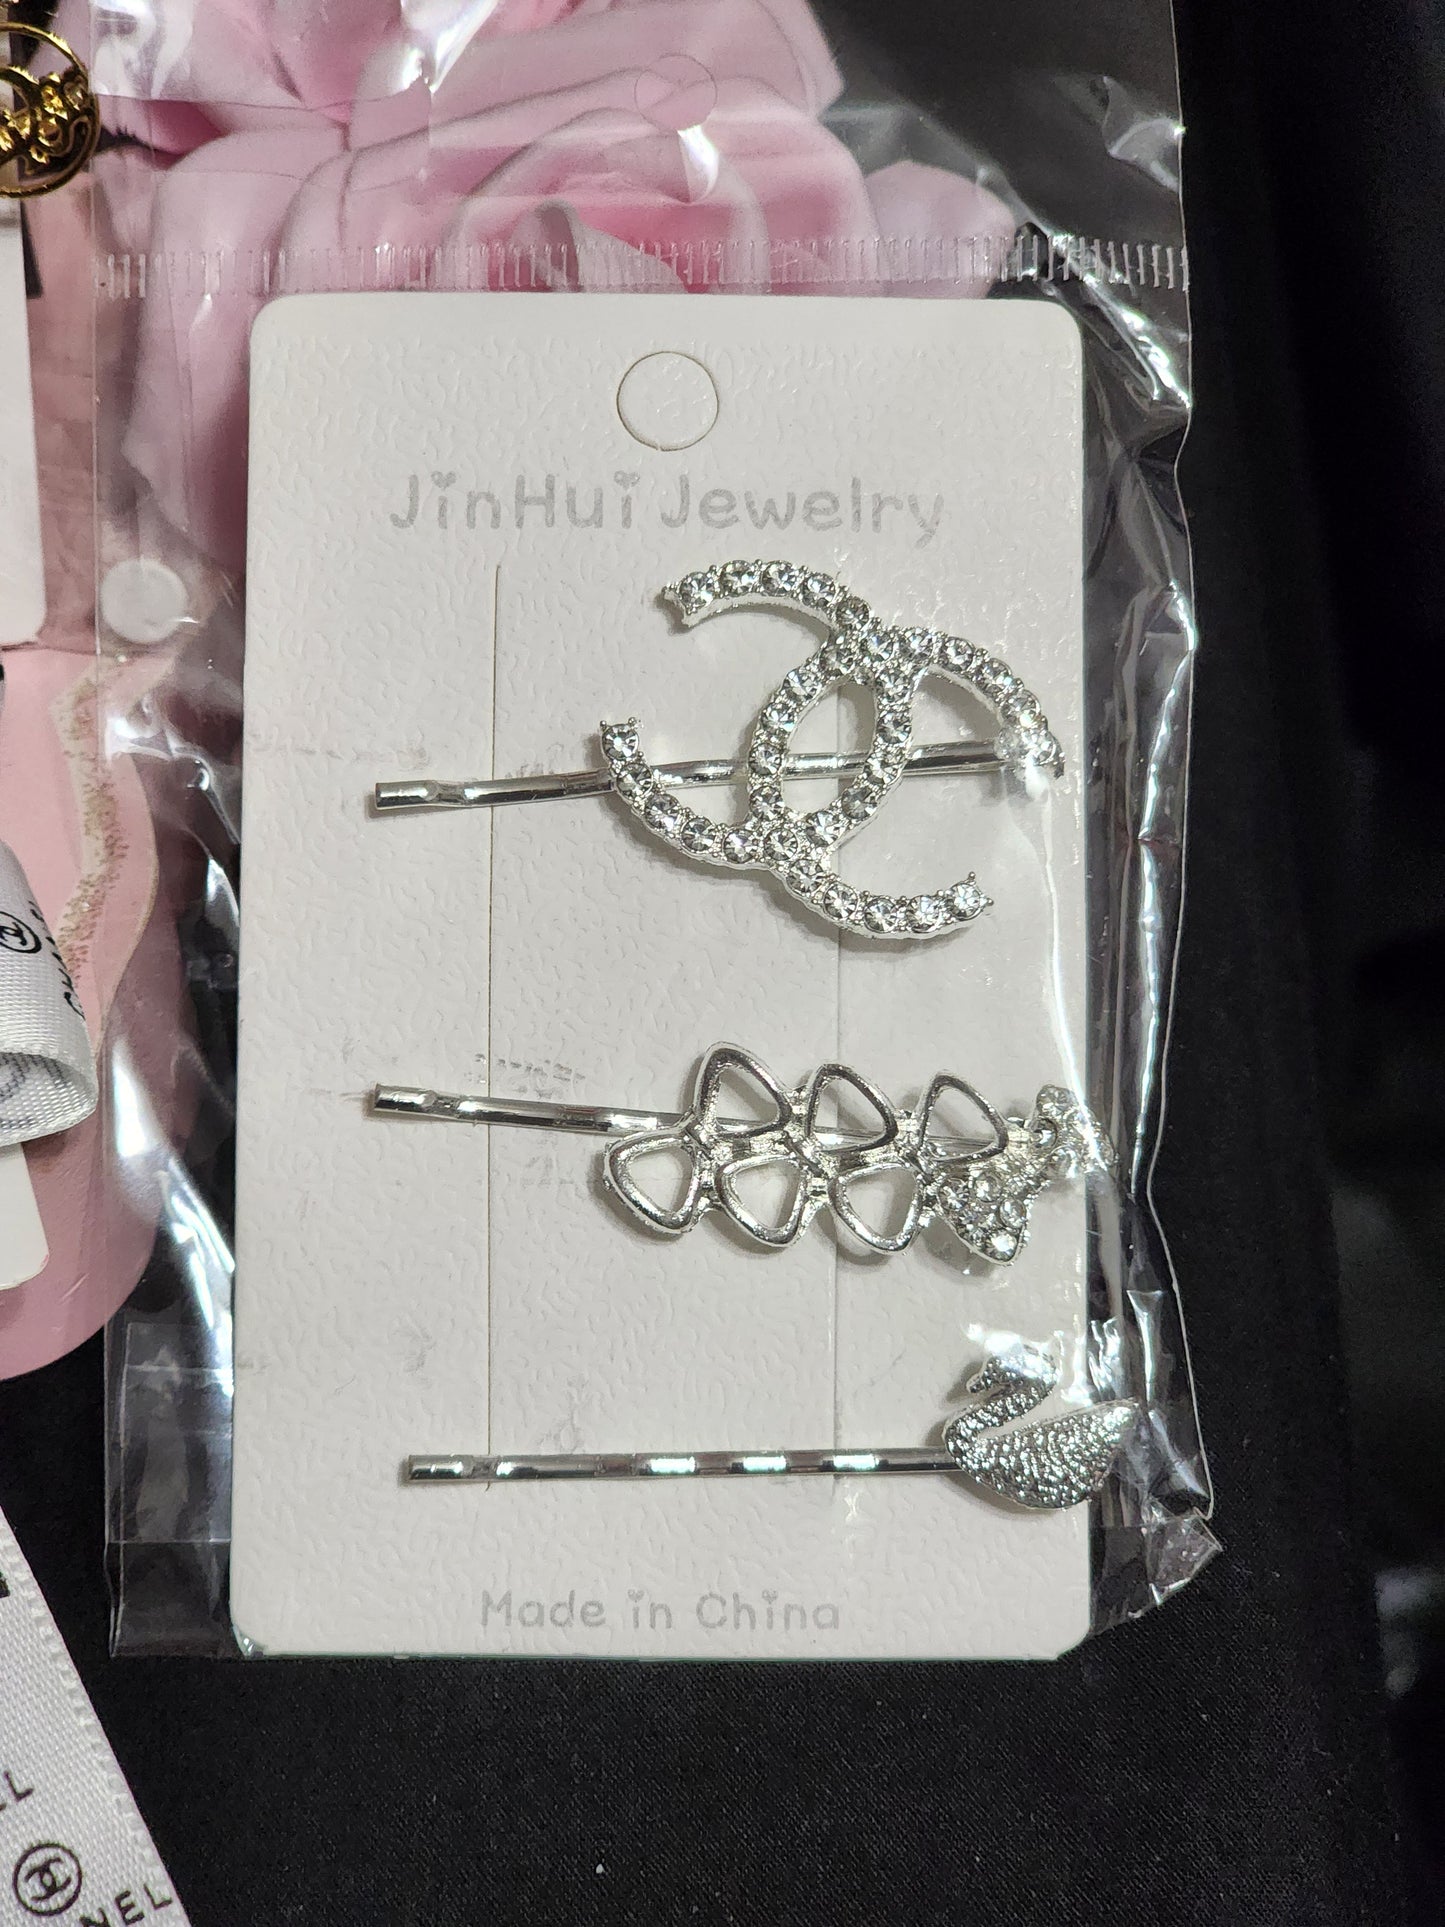 Inspired By Hair Pins/Clips Gold or Silver with Rhinestones or Packs of 5 Hair Clips